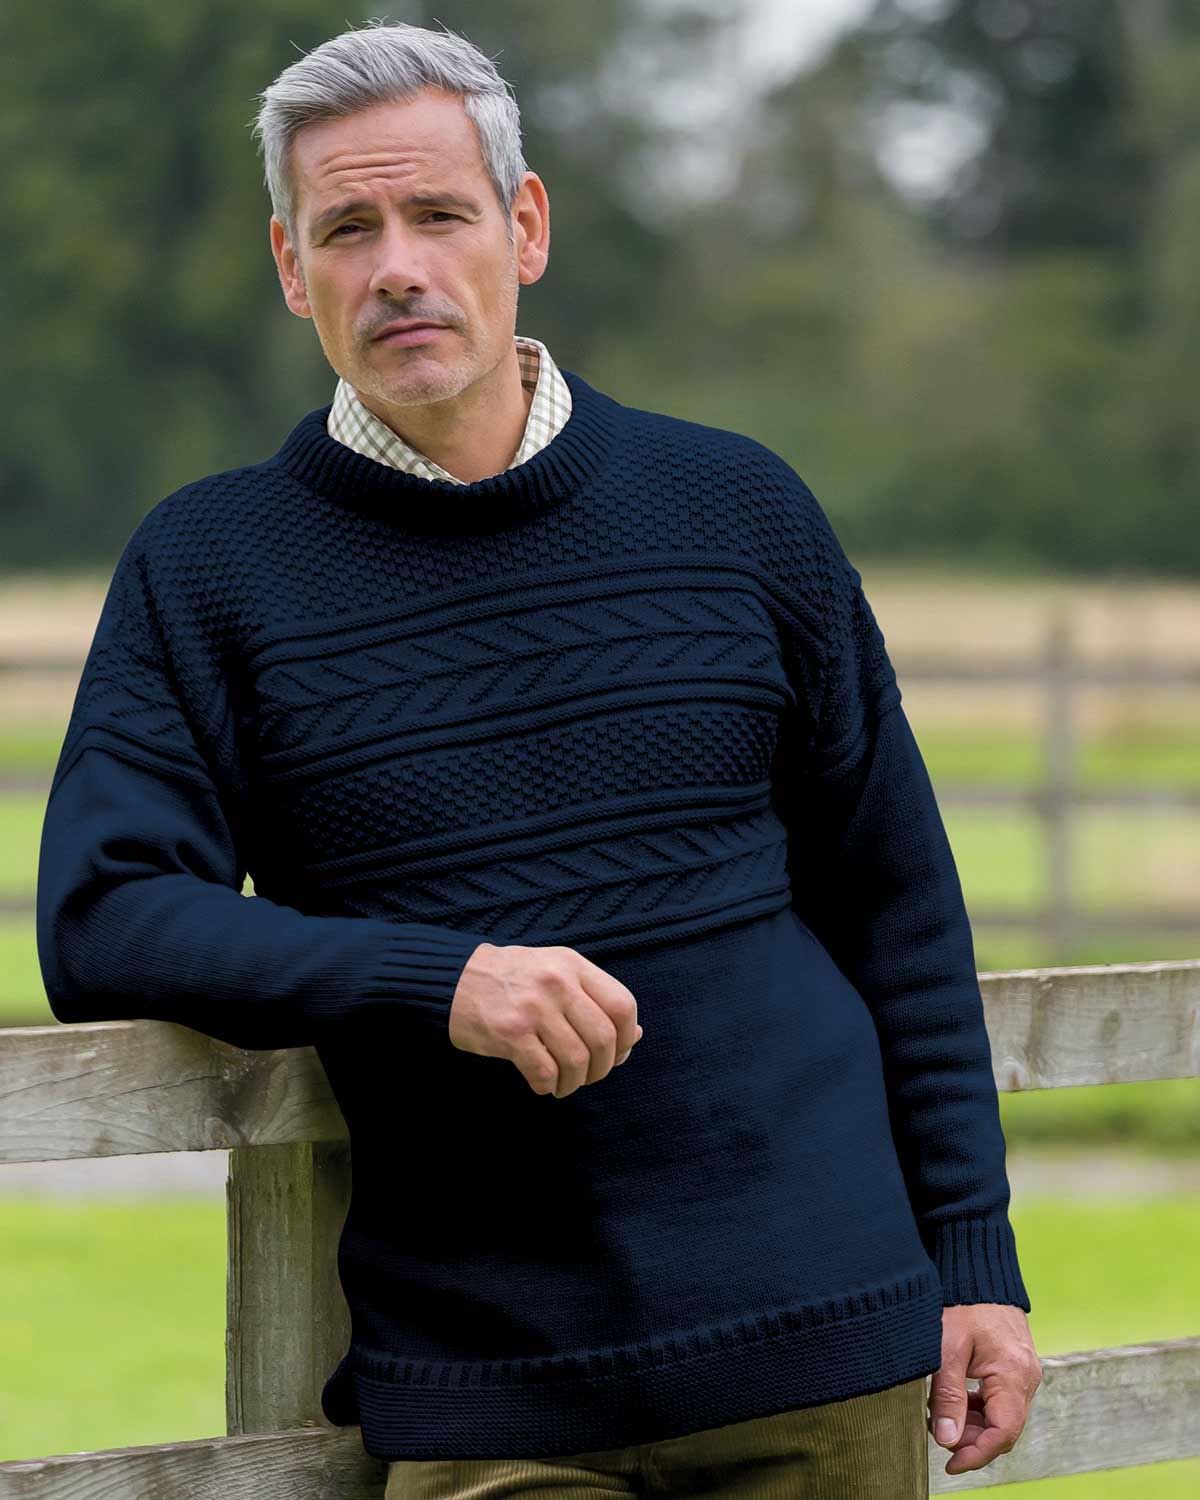 Men's Guernsey Sweater, a classic example of menswear knitwear